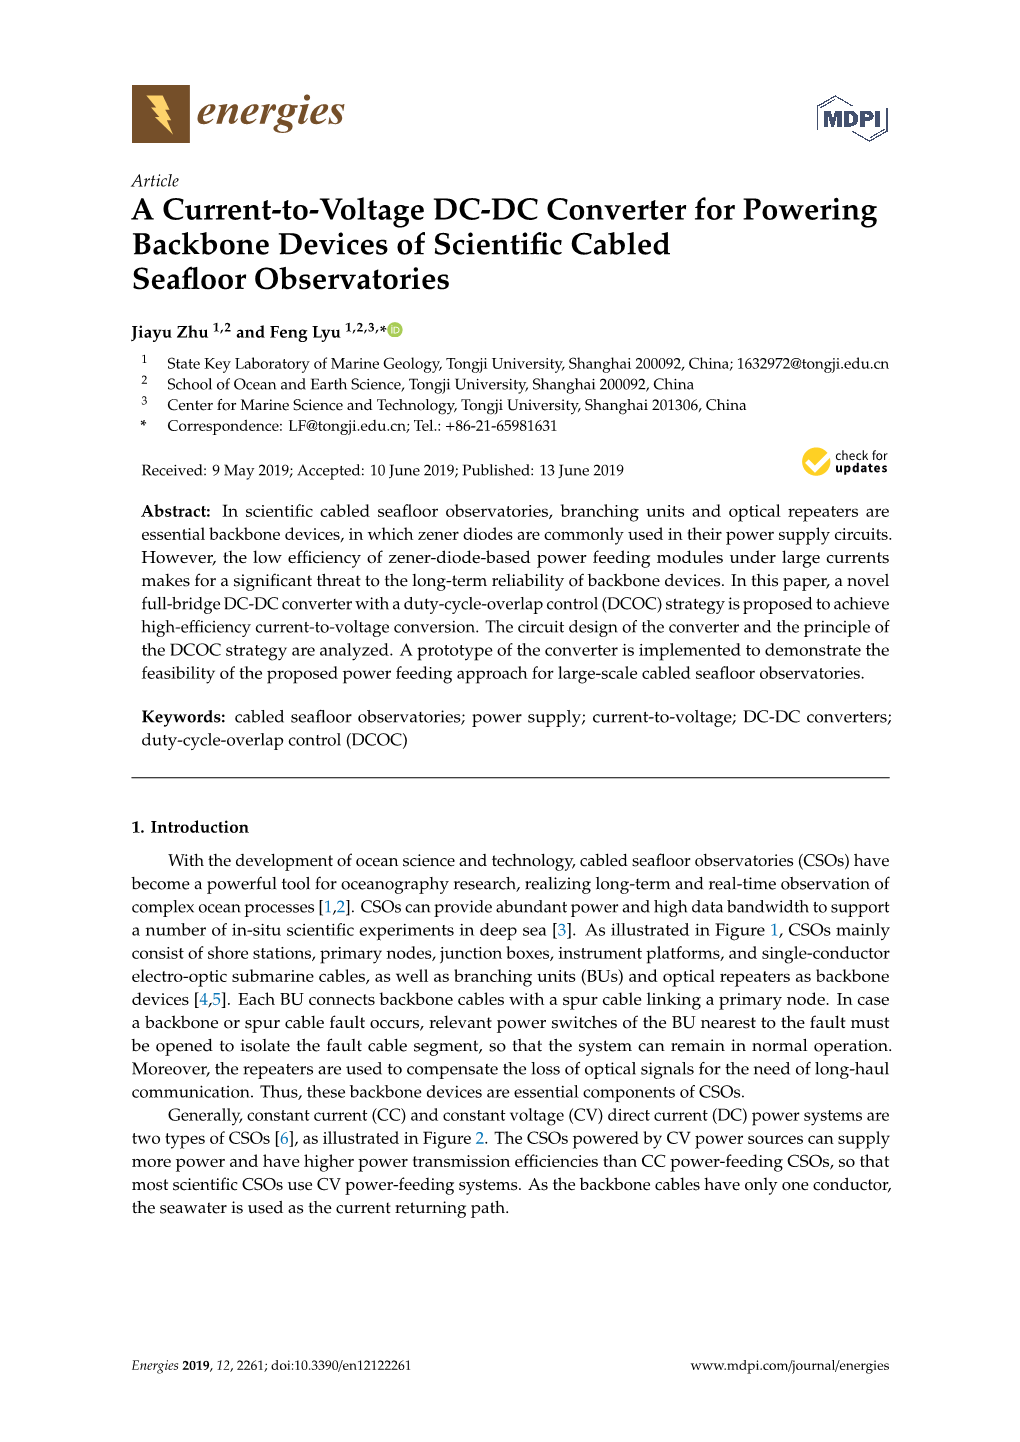 A Current-To-Voltage DC-DC Converter for Powering Backbone Devices of Scientiﬁc Cabled Seaﬂoor Observatories